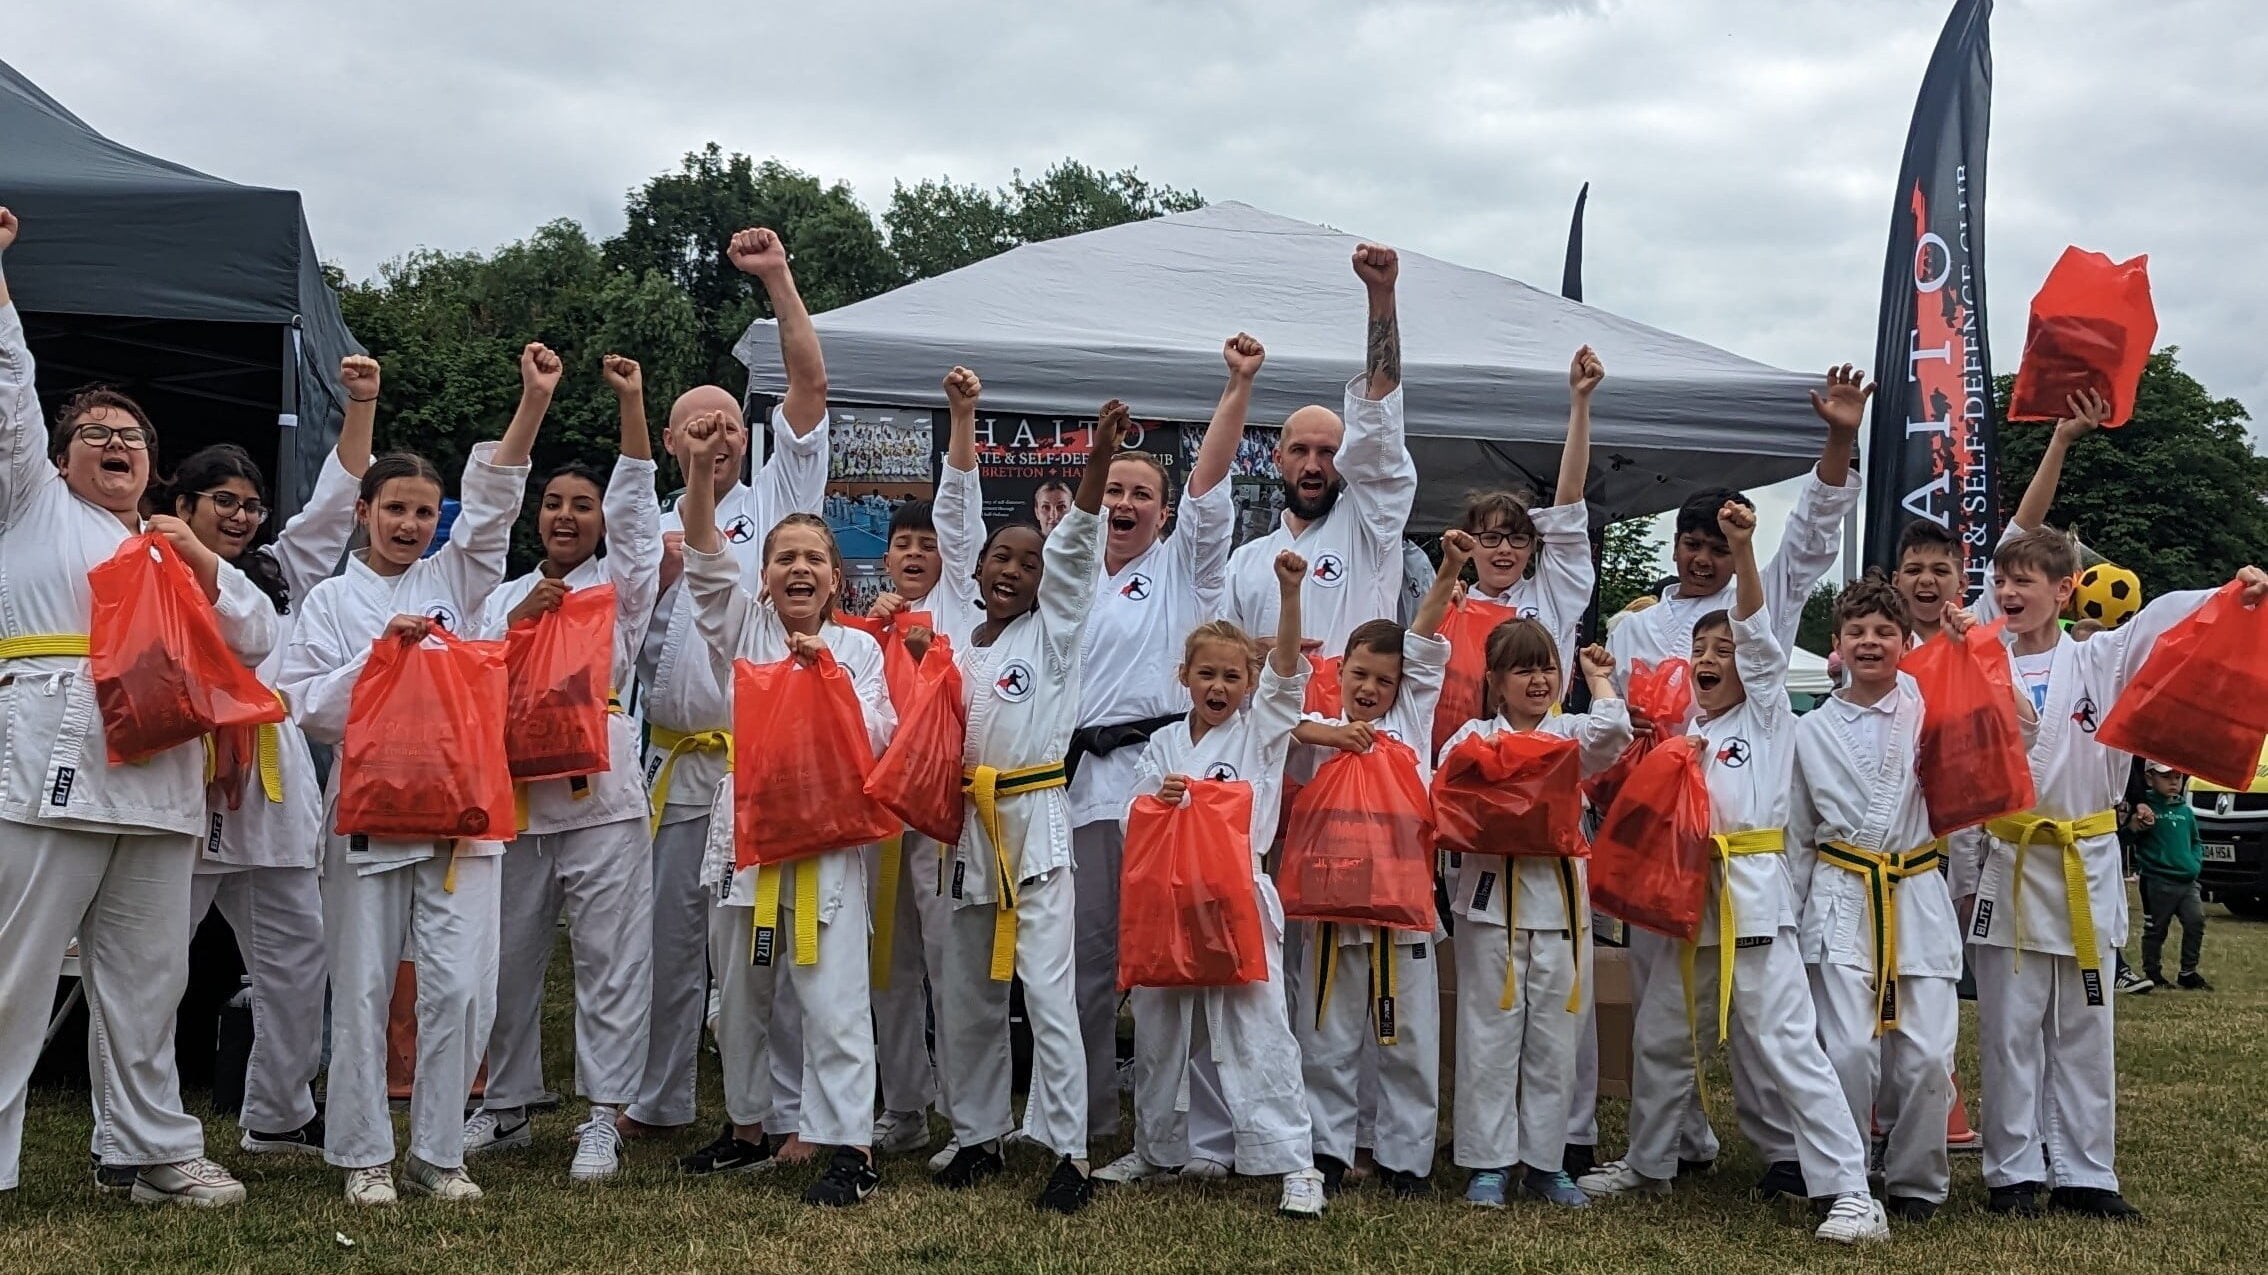 Bretton Community Festival A Display of Karate Excellence